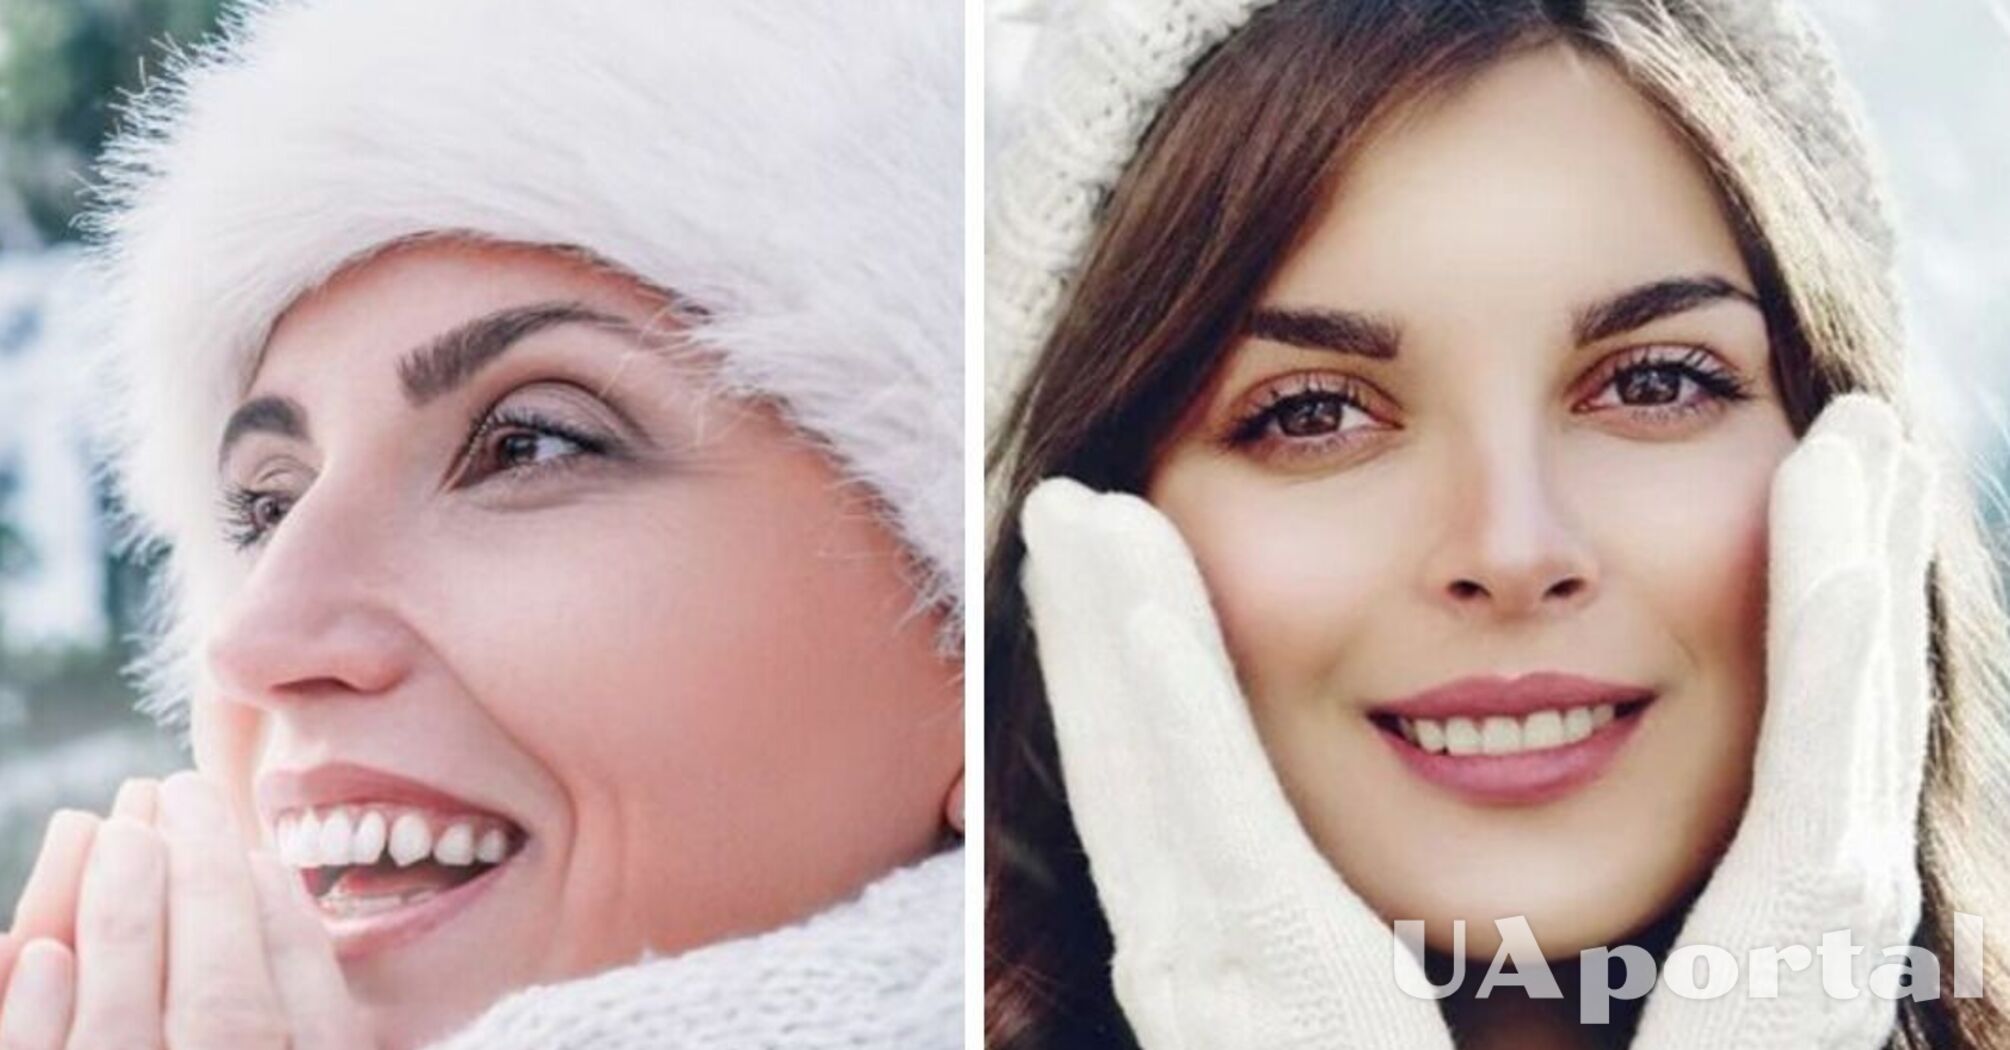 Healthy glow: how to take care of your face skin in winter